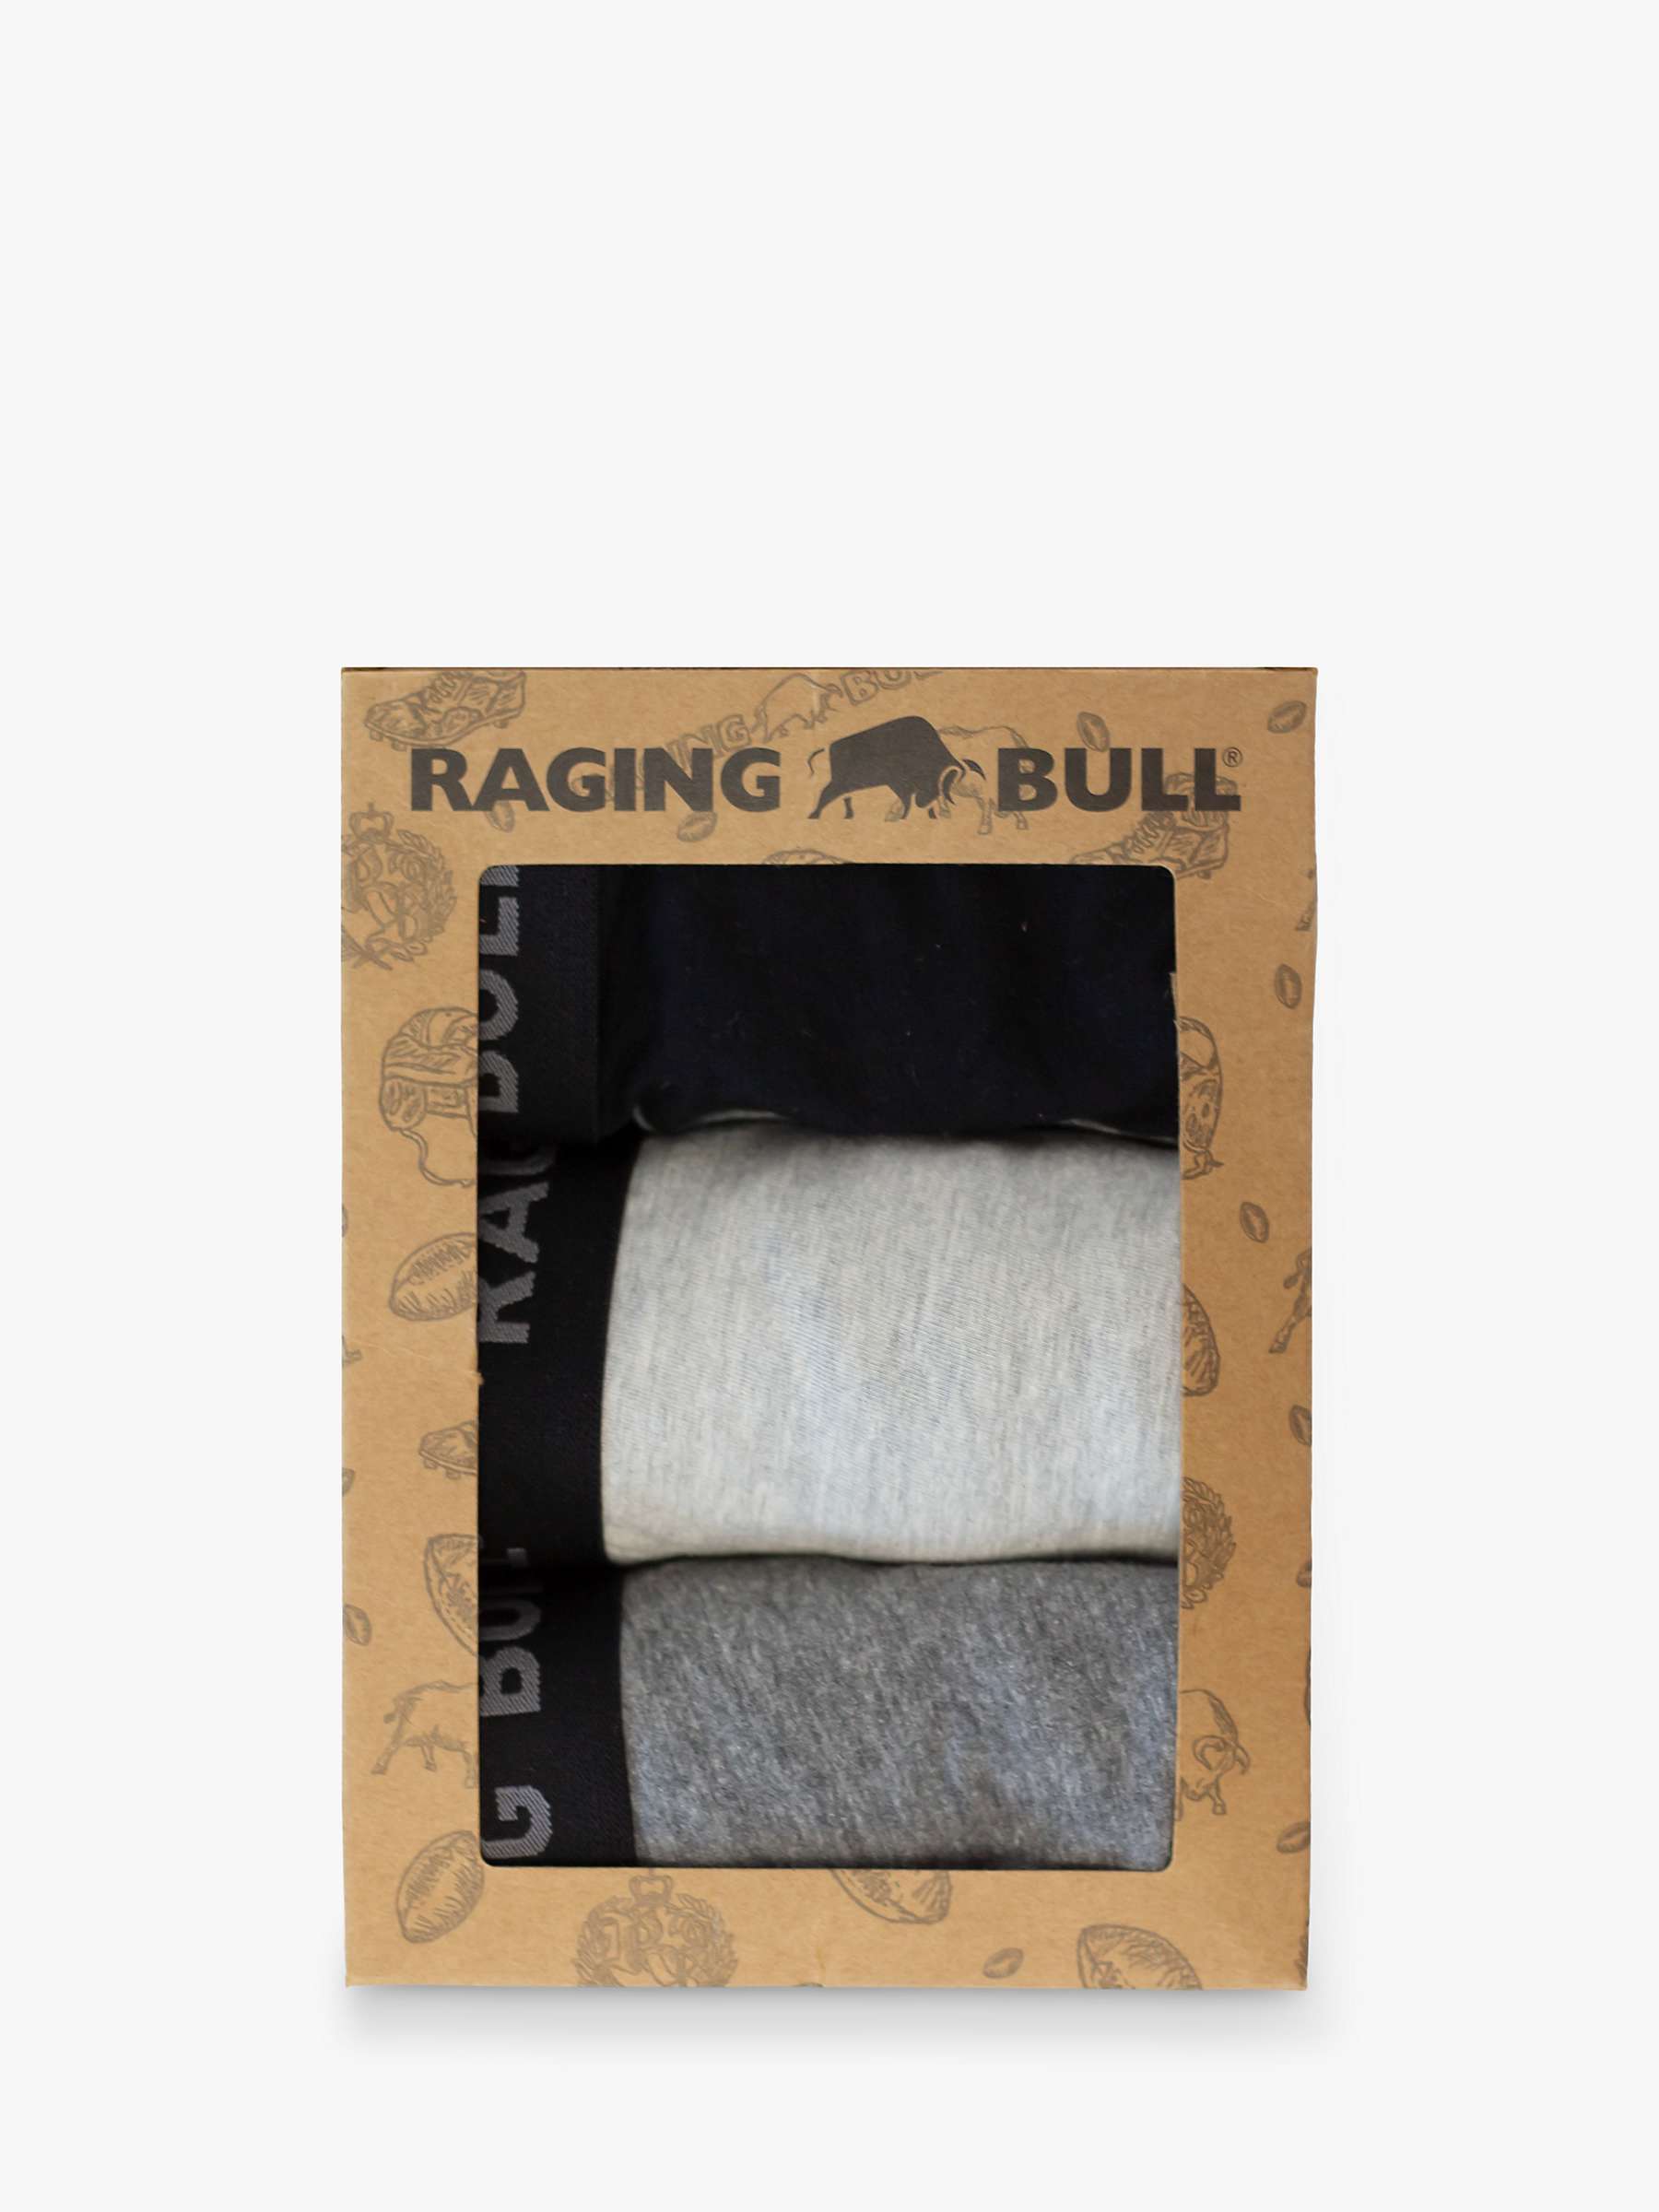 Buy Raging Bull Cotton Stretch Boxers, Pack of 3, Black Online at johnlewis.com